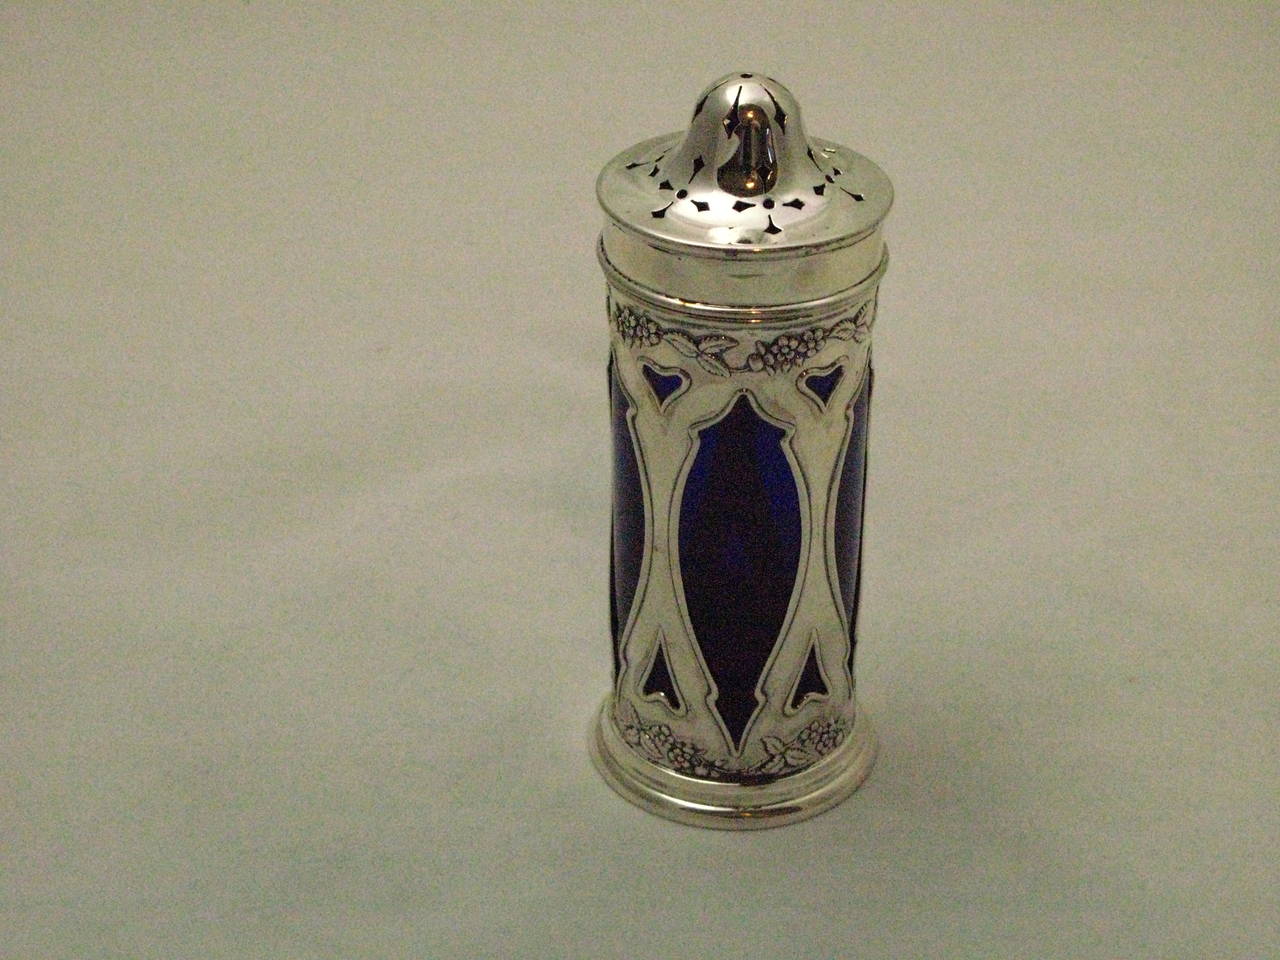 Beautiful silver sugar caster with blue glass lining from the Art Nouveau period.
The caster is hallmarked in Birmingham 1907 and makers marks for Henry Williamson Ltd. The caster is 925/sterling silver.

The caster is circa 15,5 cm high and the